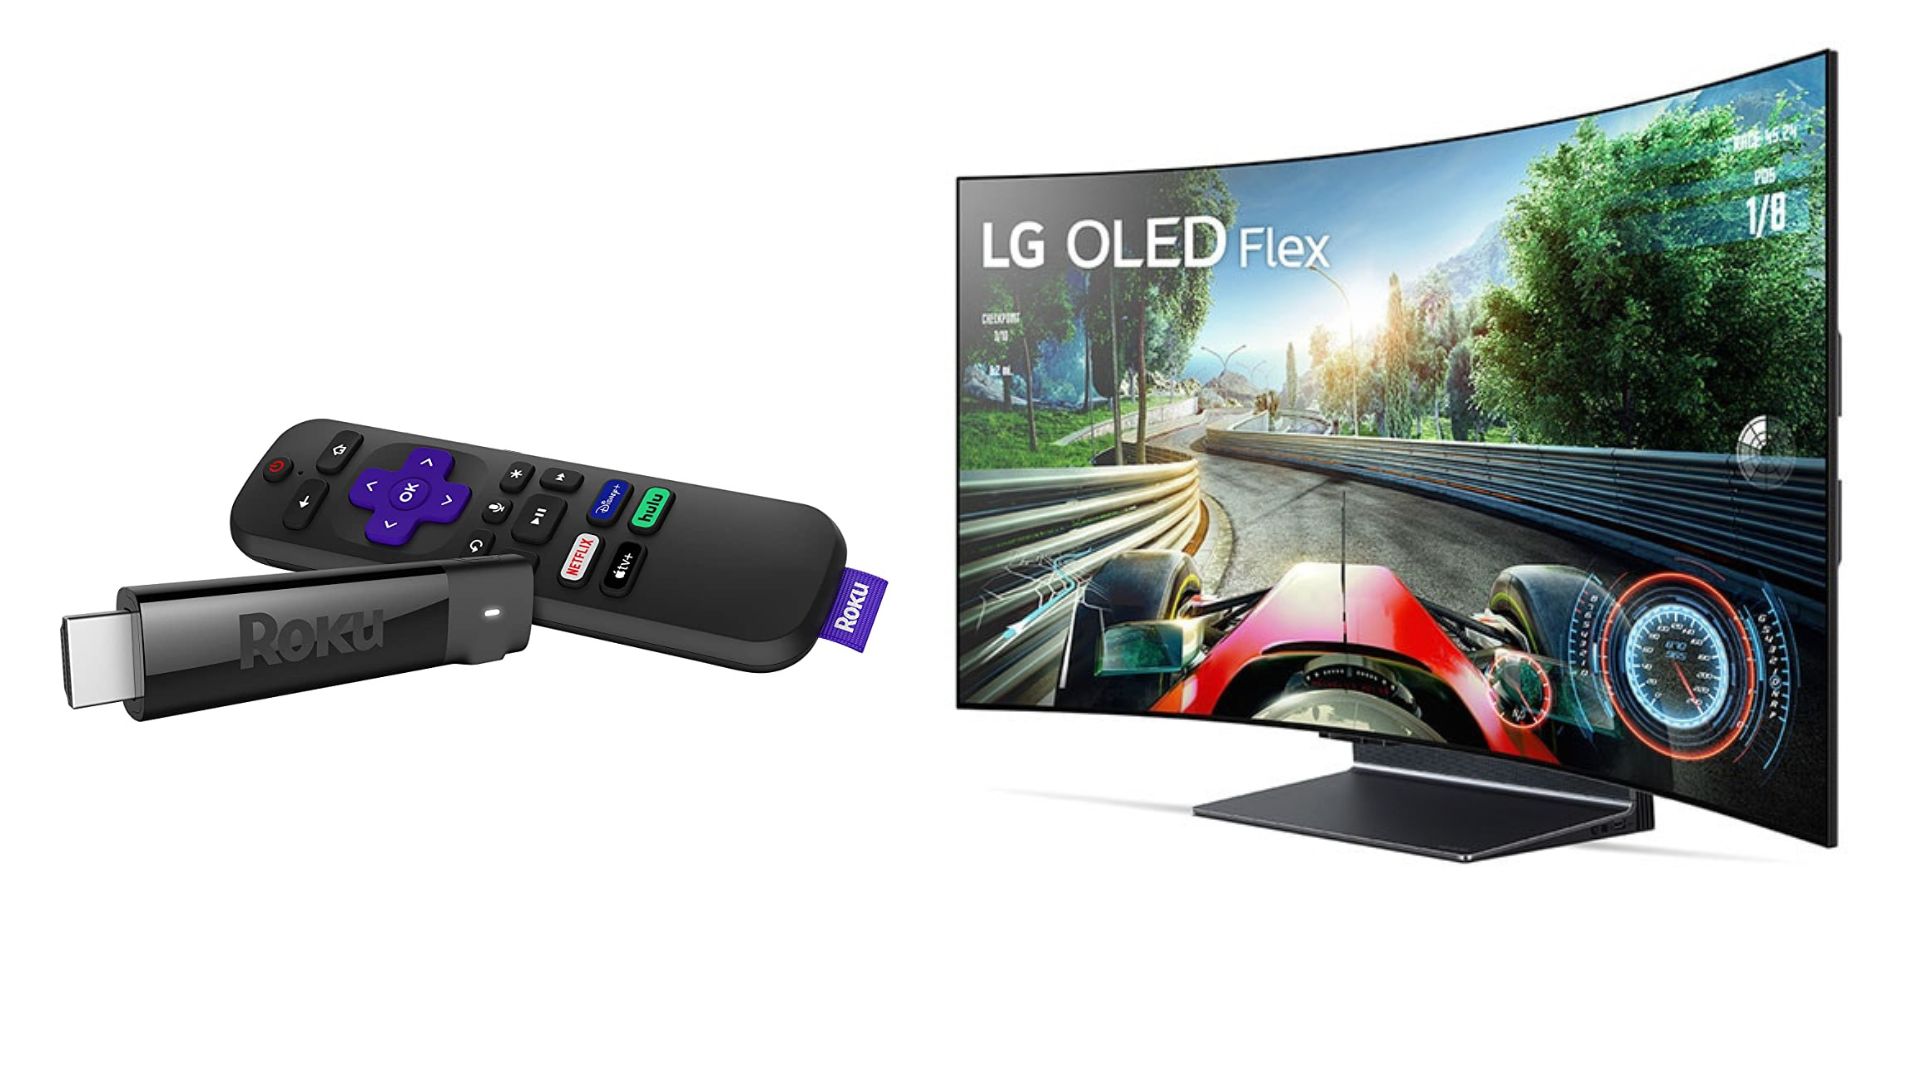 How to get Roku on LG Smart TV